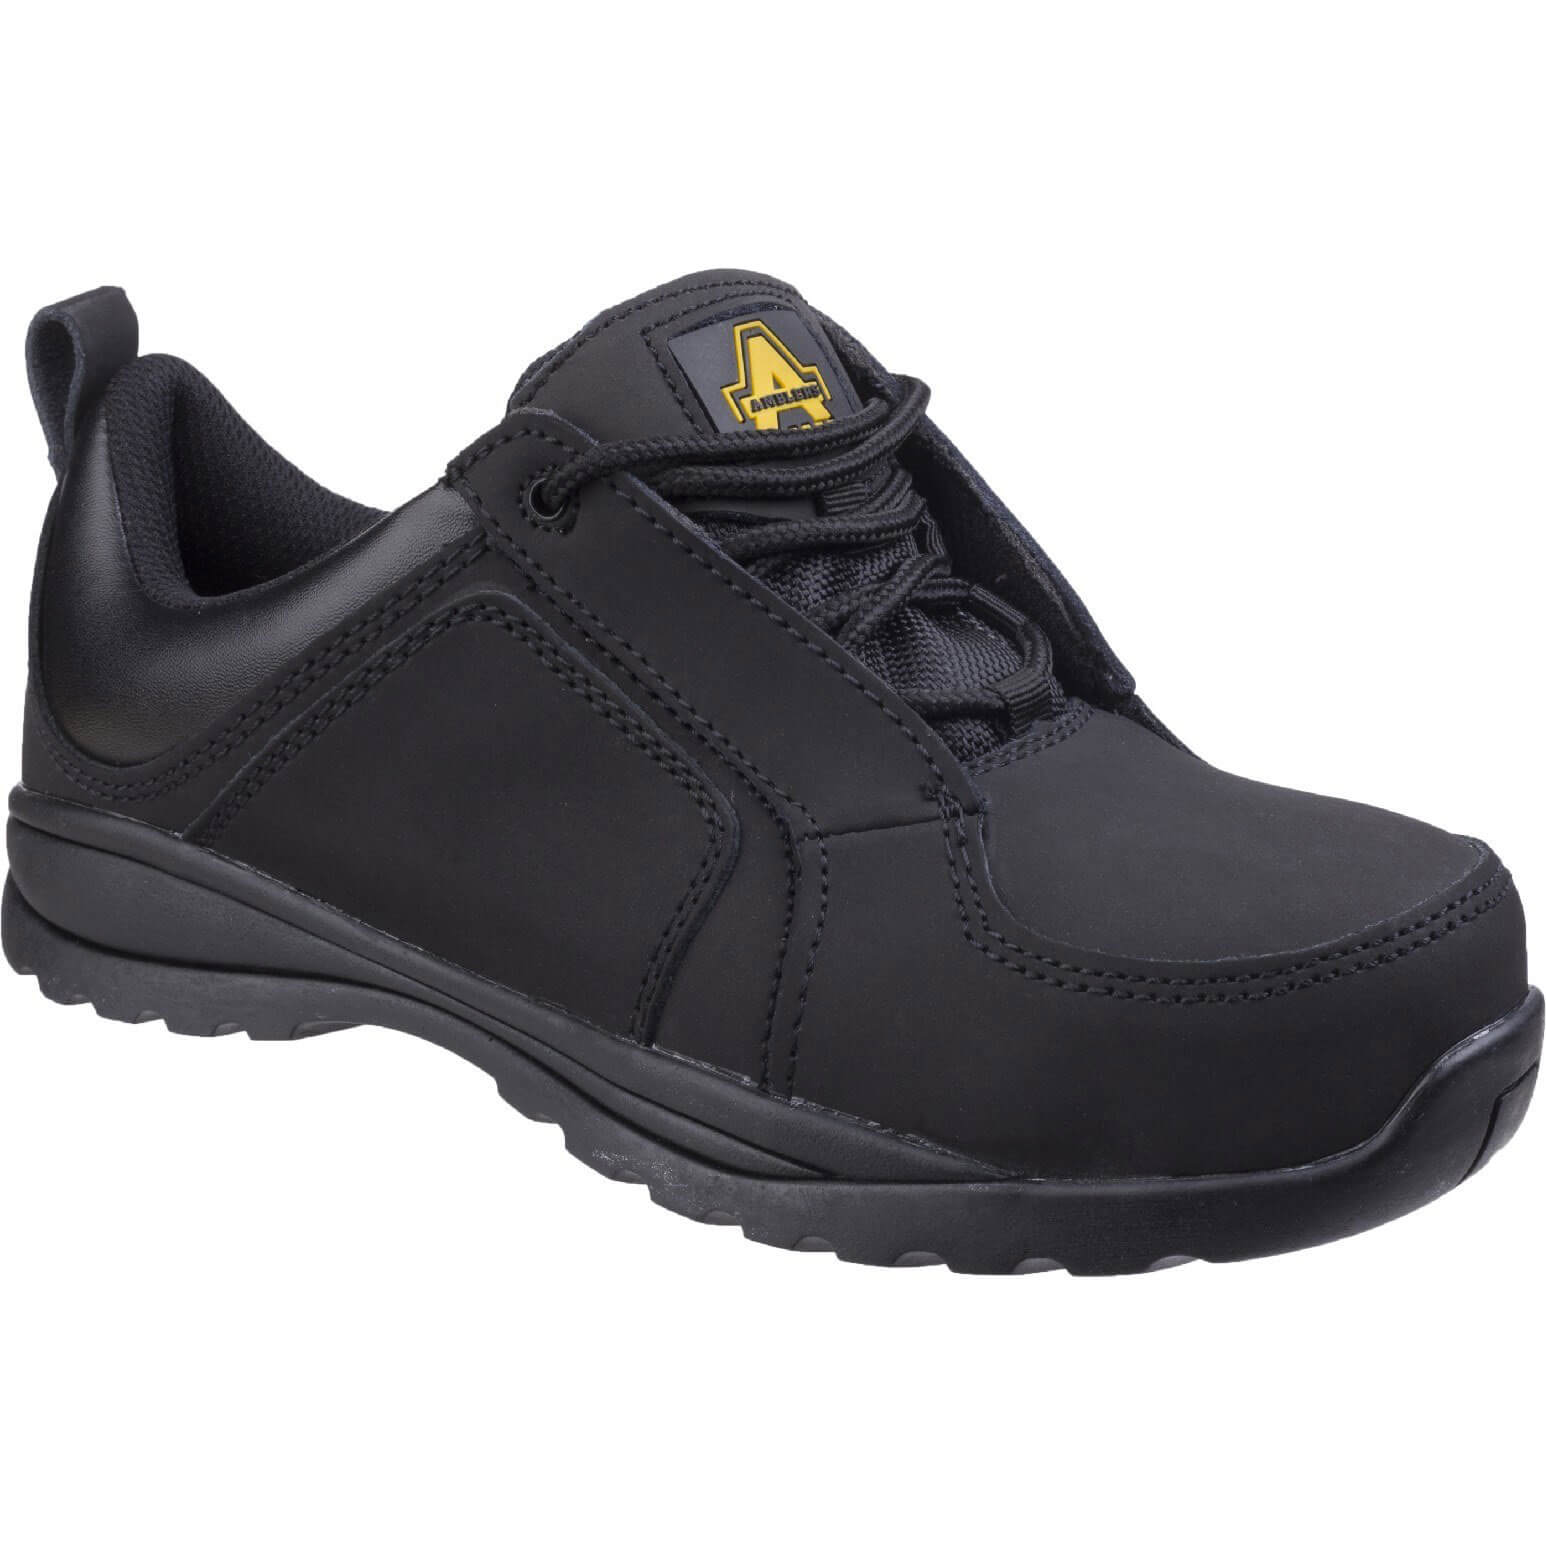 Image of Amblers Safety FS59C Metal Free Lace Up Safety Trainer Black Size 2